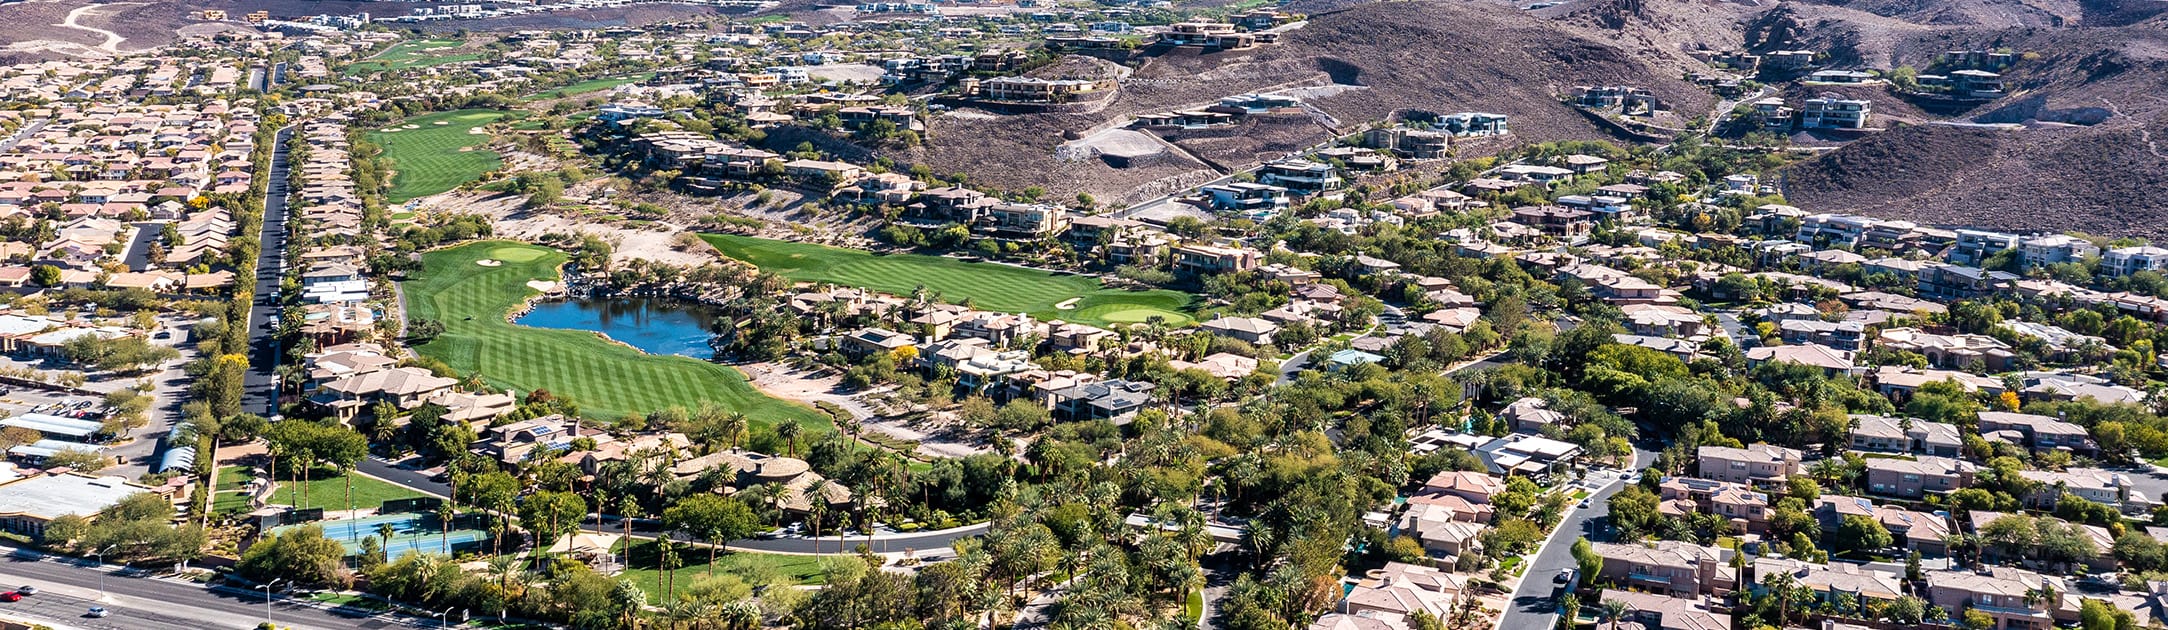 Aerial view of golf course with luxury homes that go up a hillside.